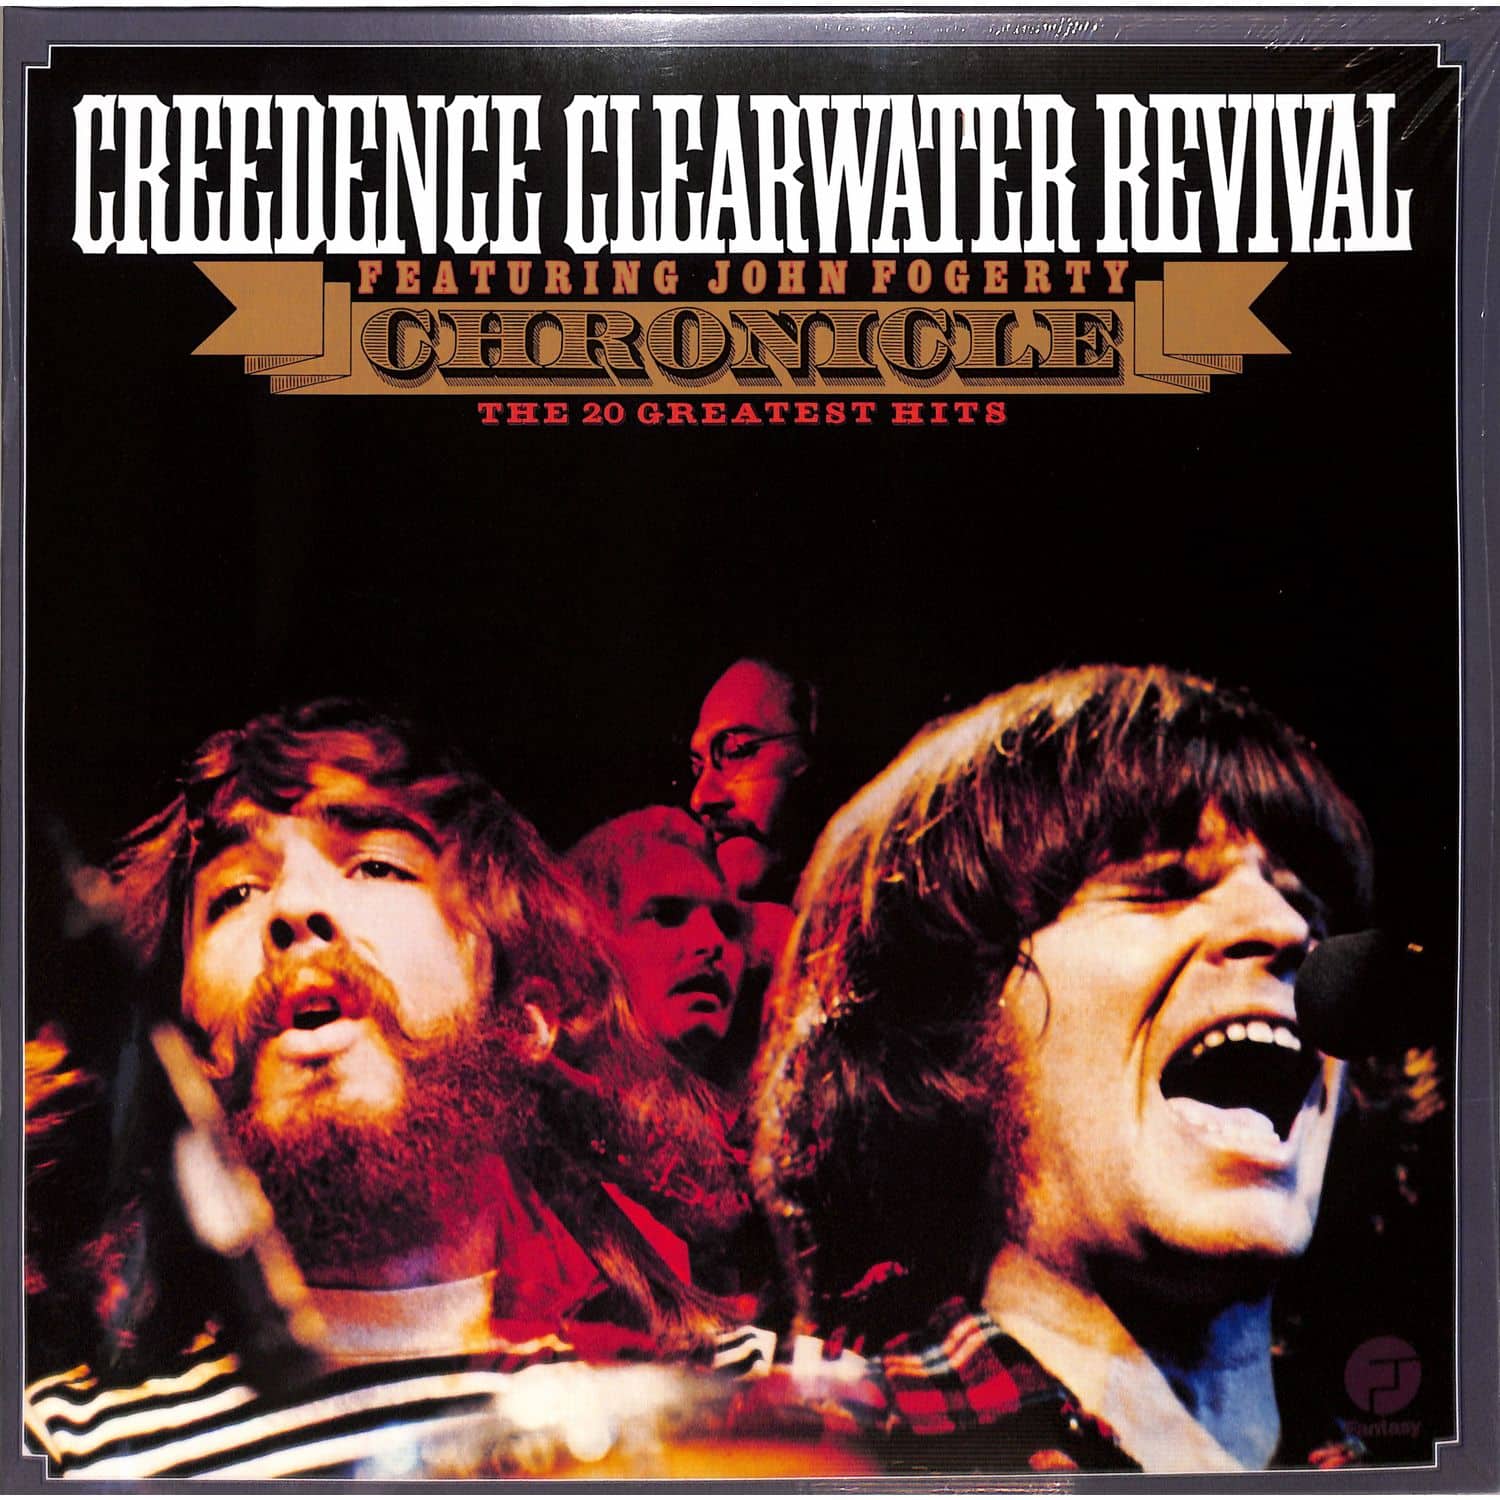 Creedence Clearwater Revival - CHRONICLE: THE 20 GREATEST HITS 